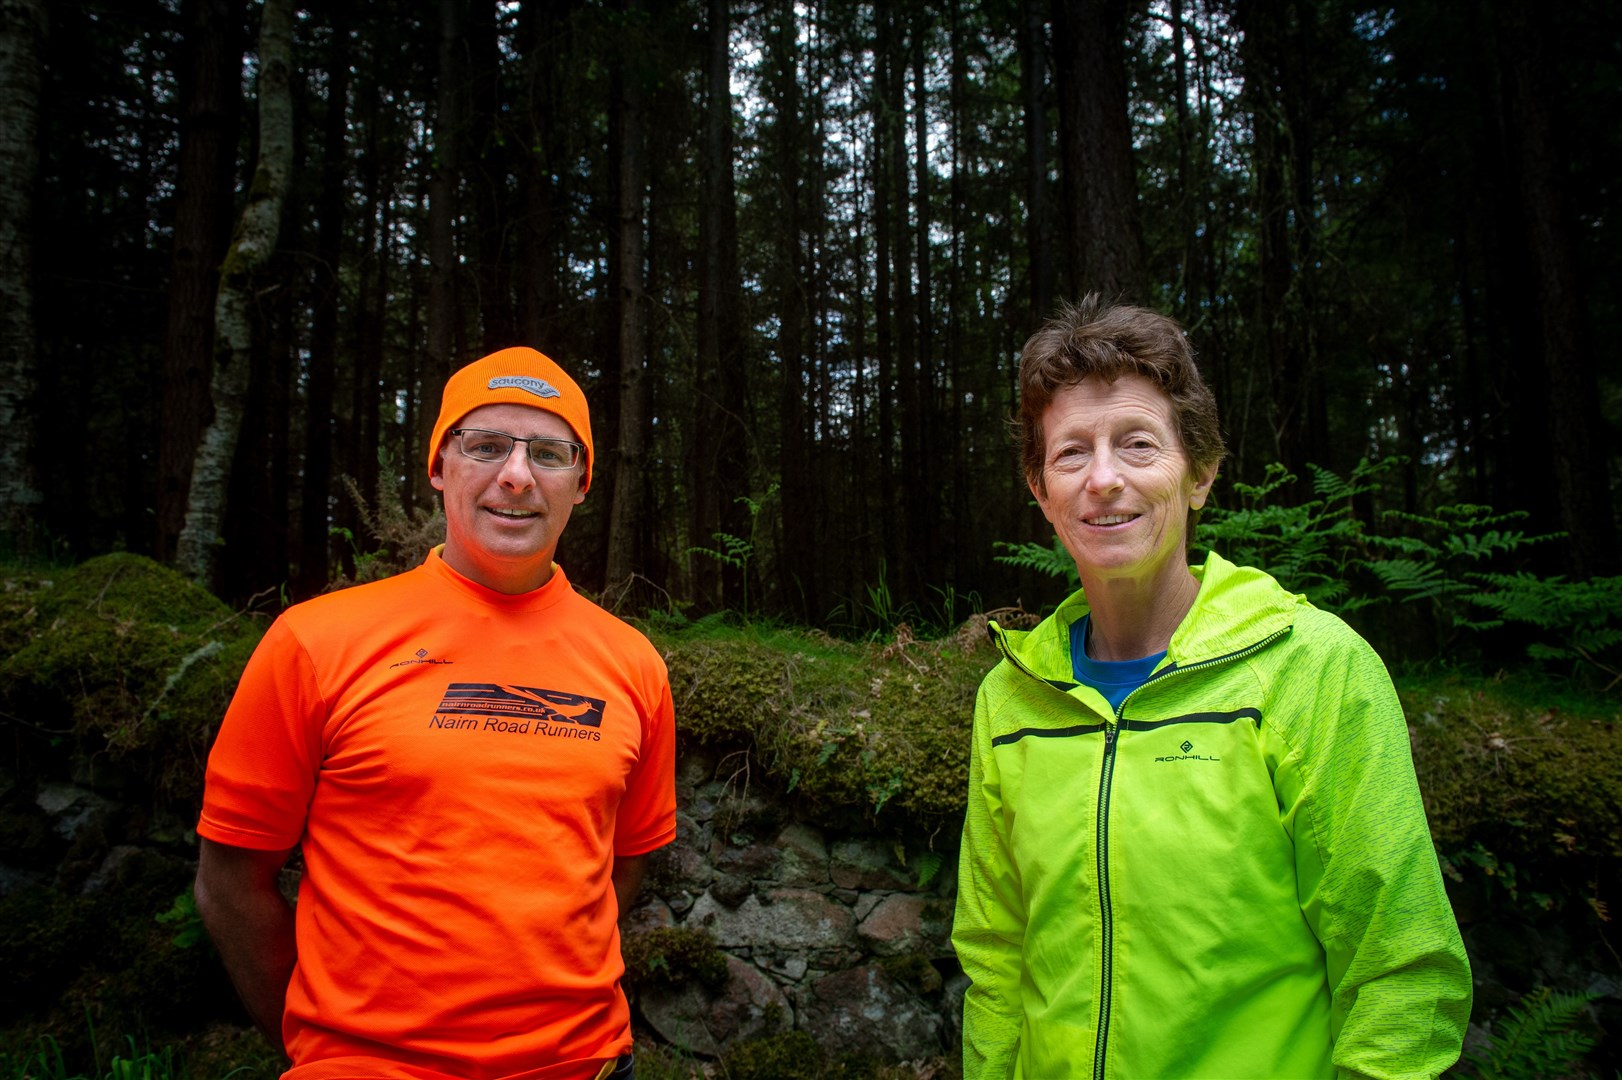 Stephen Fraser, chairman of Nairn Road Runners, and Gillian Cummins at the spot where she was attacked by the buzzard.